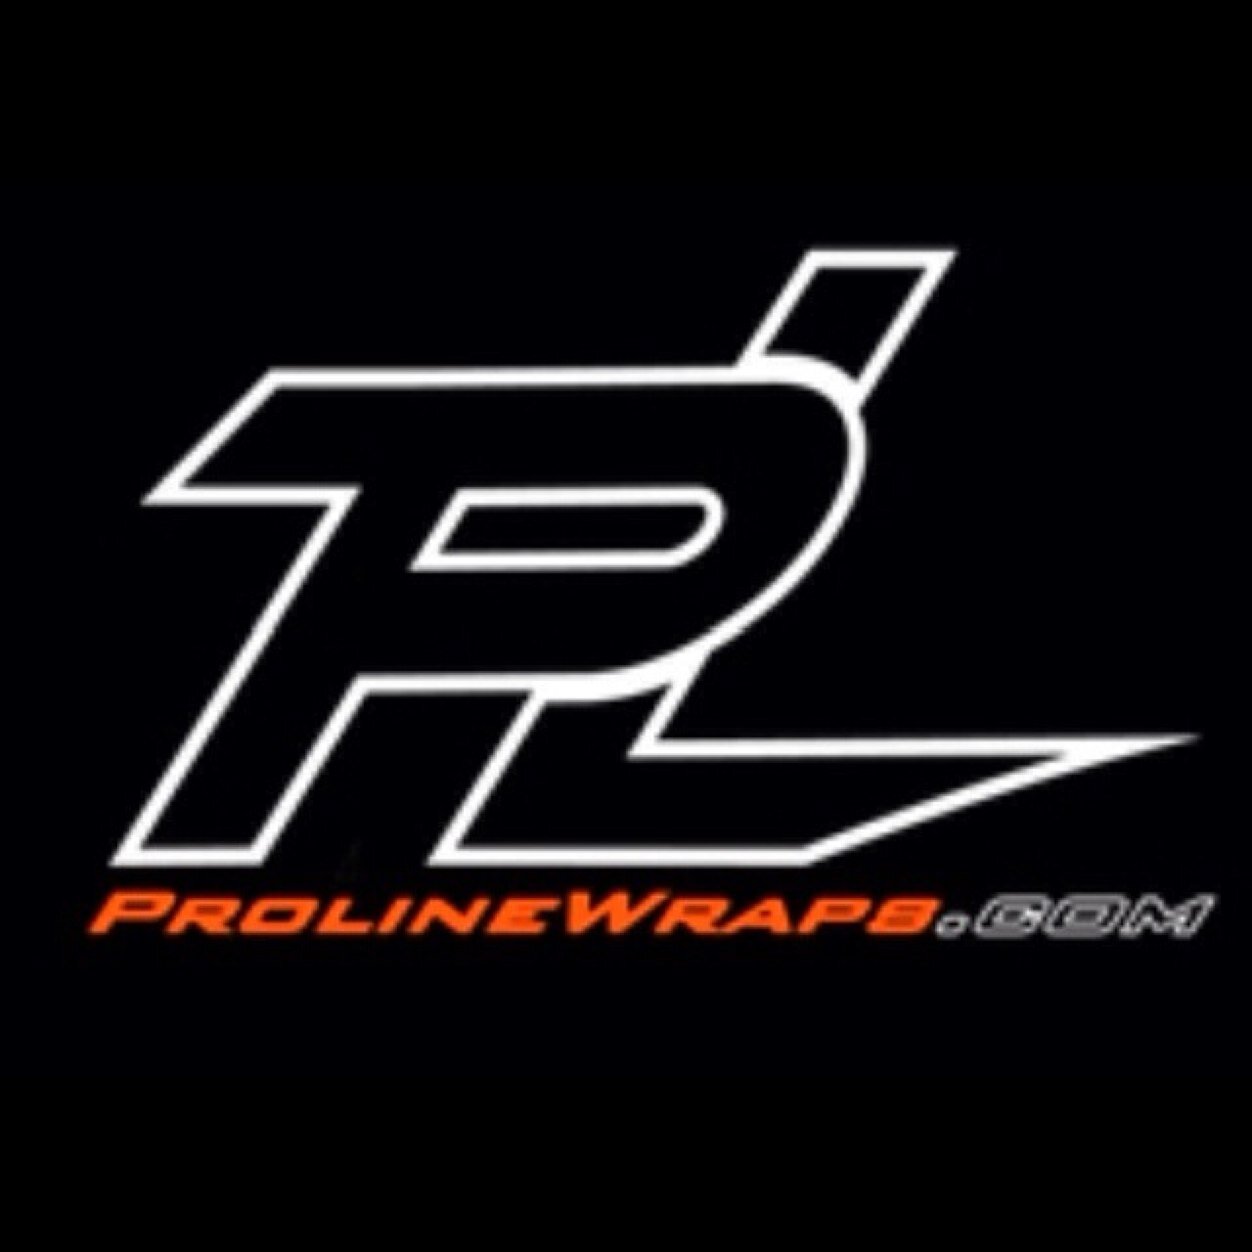 Proline Wraps is the leader in digital graphics